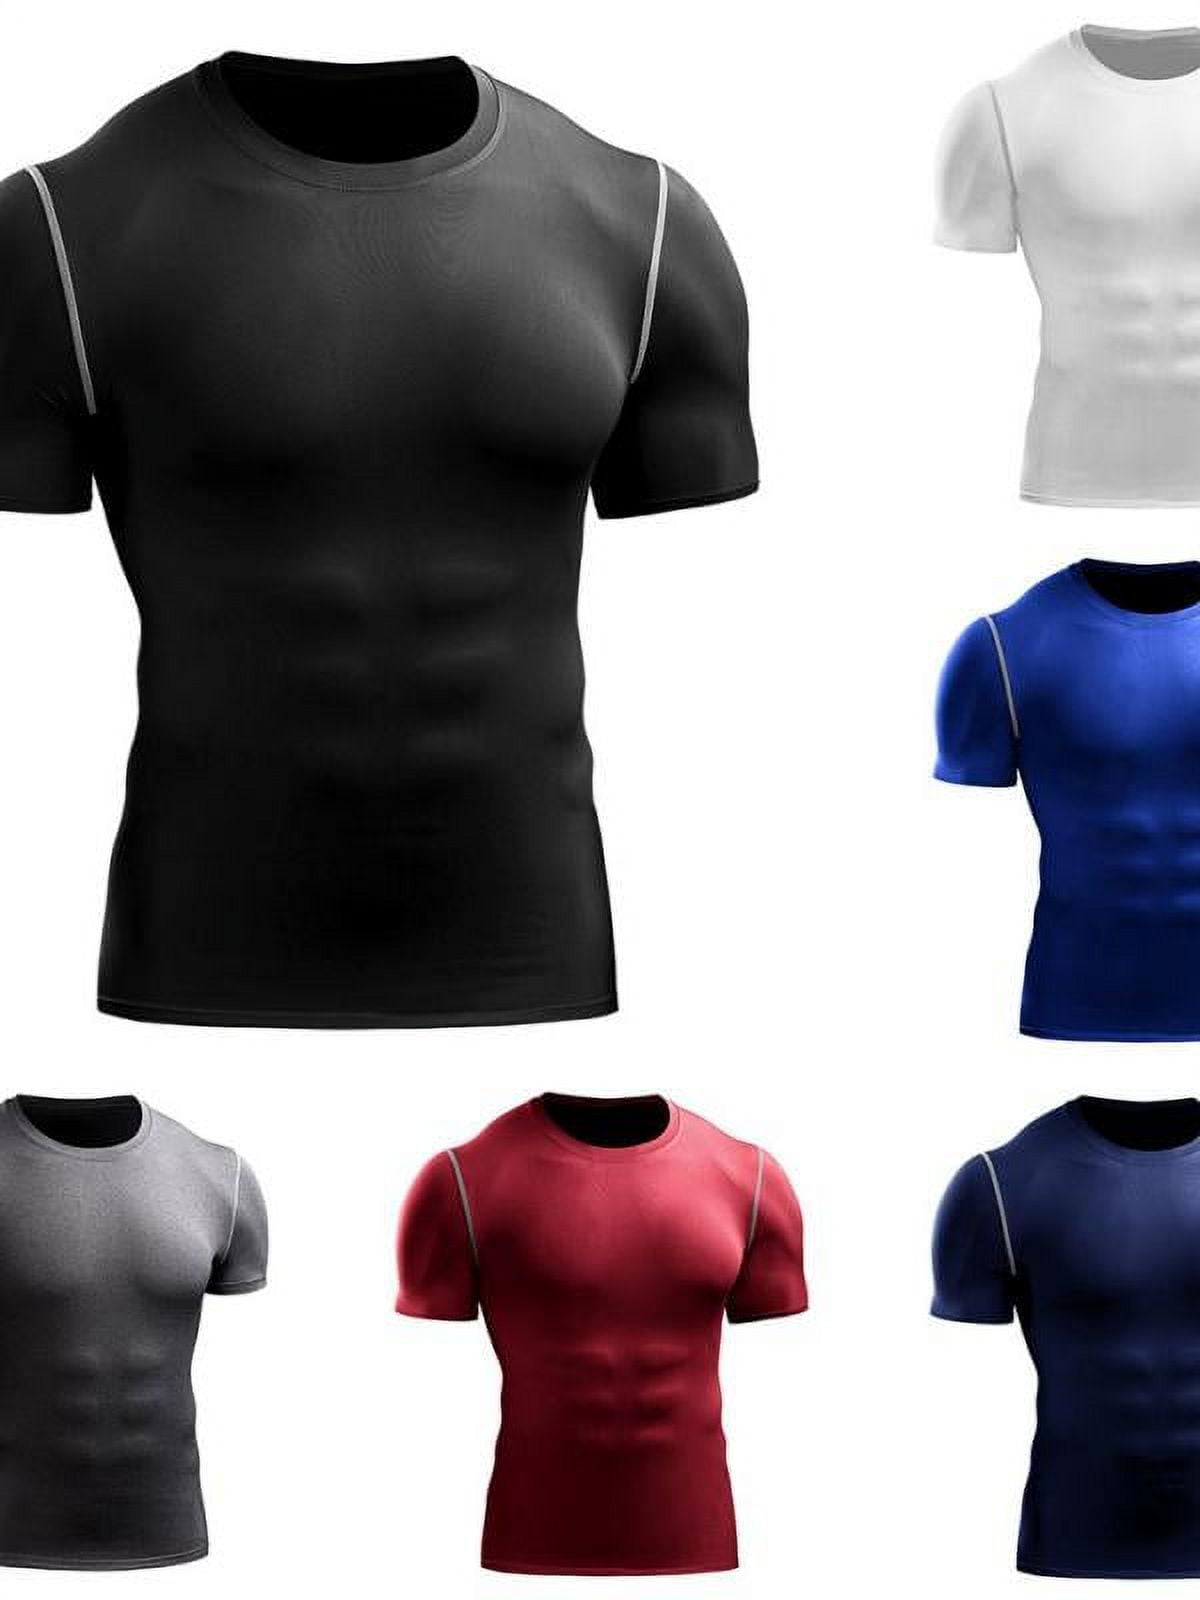  Mava Sports Compression Short Sleeve Shirt for Men - Baselayer  Athletic Workout T-Shirt for Gym Workout : Clothing, Shoes & Jewelry